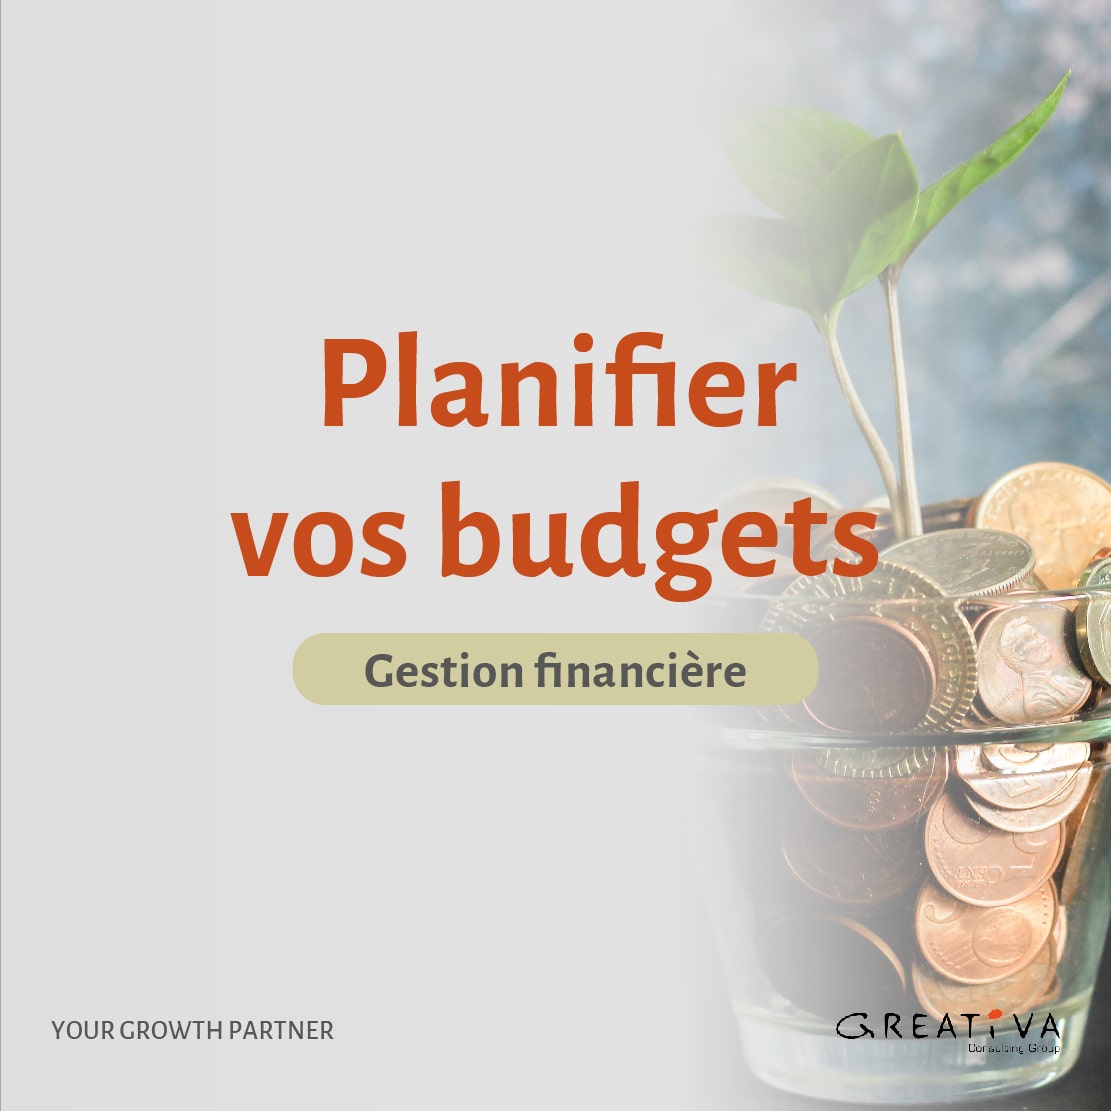 Planifier vos budgets